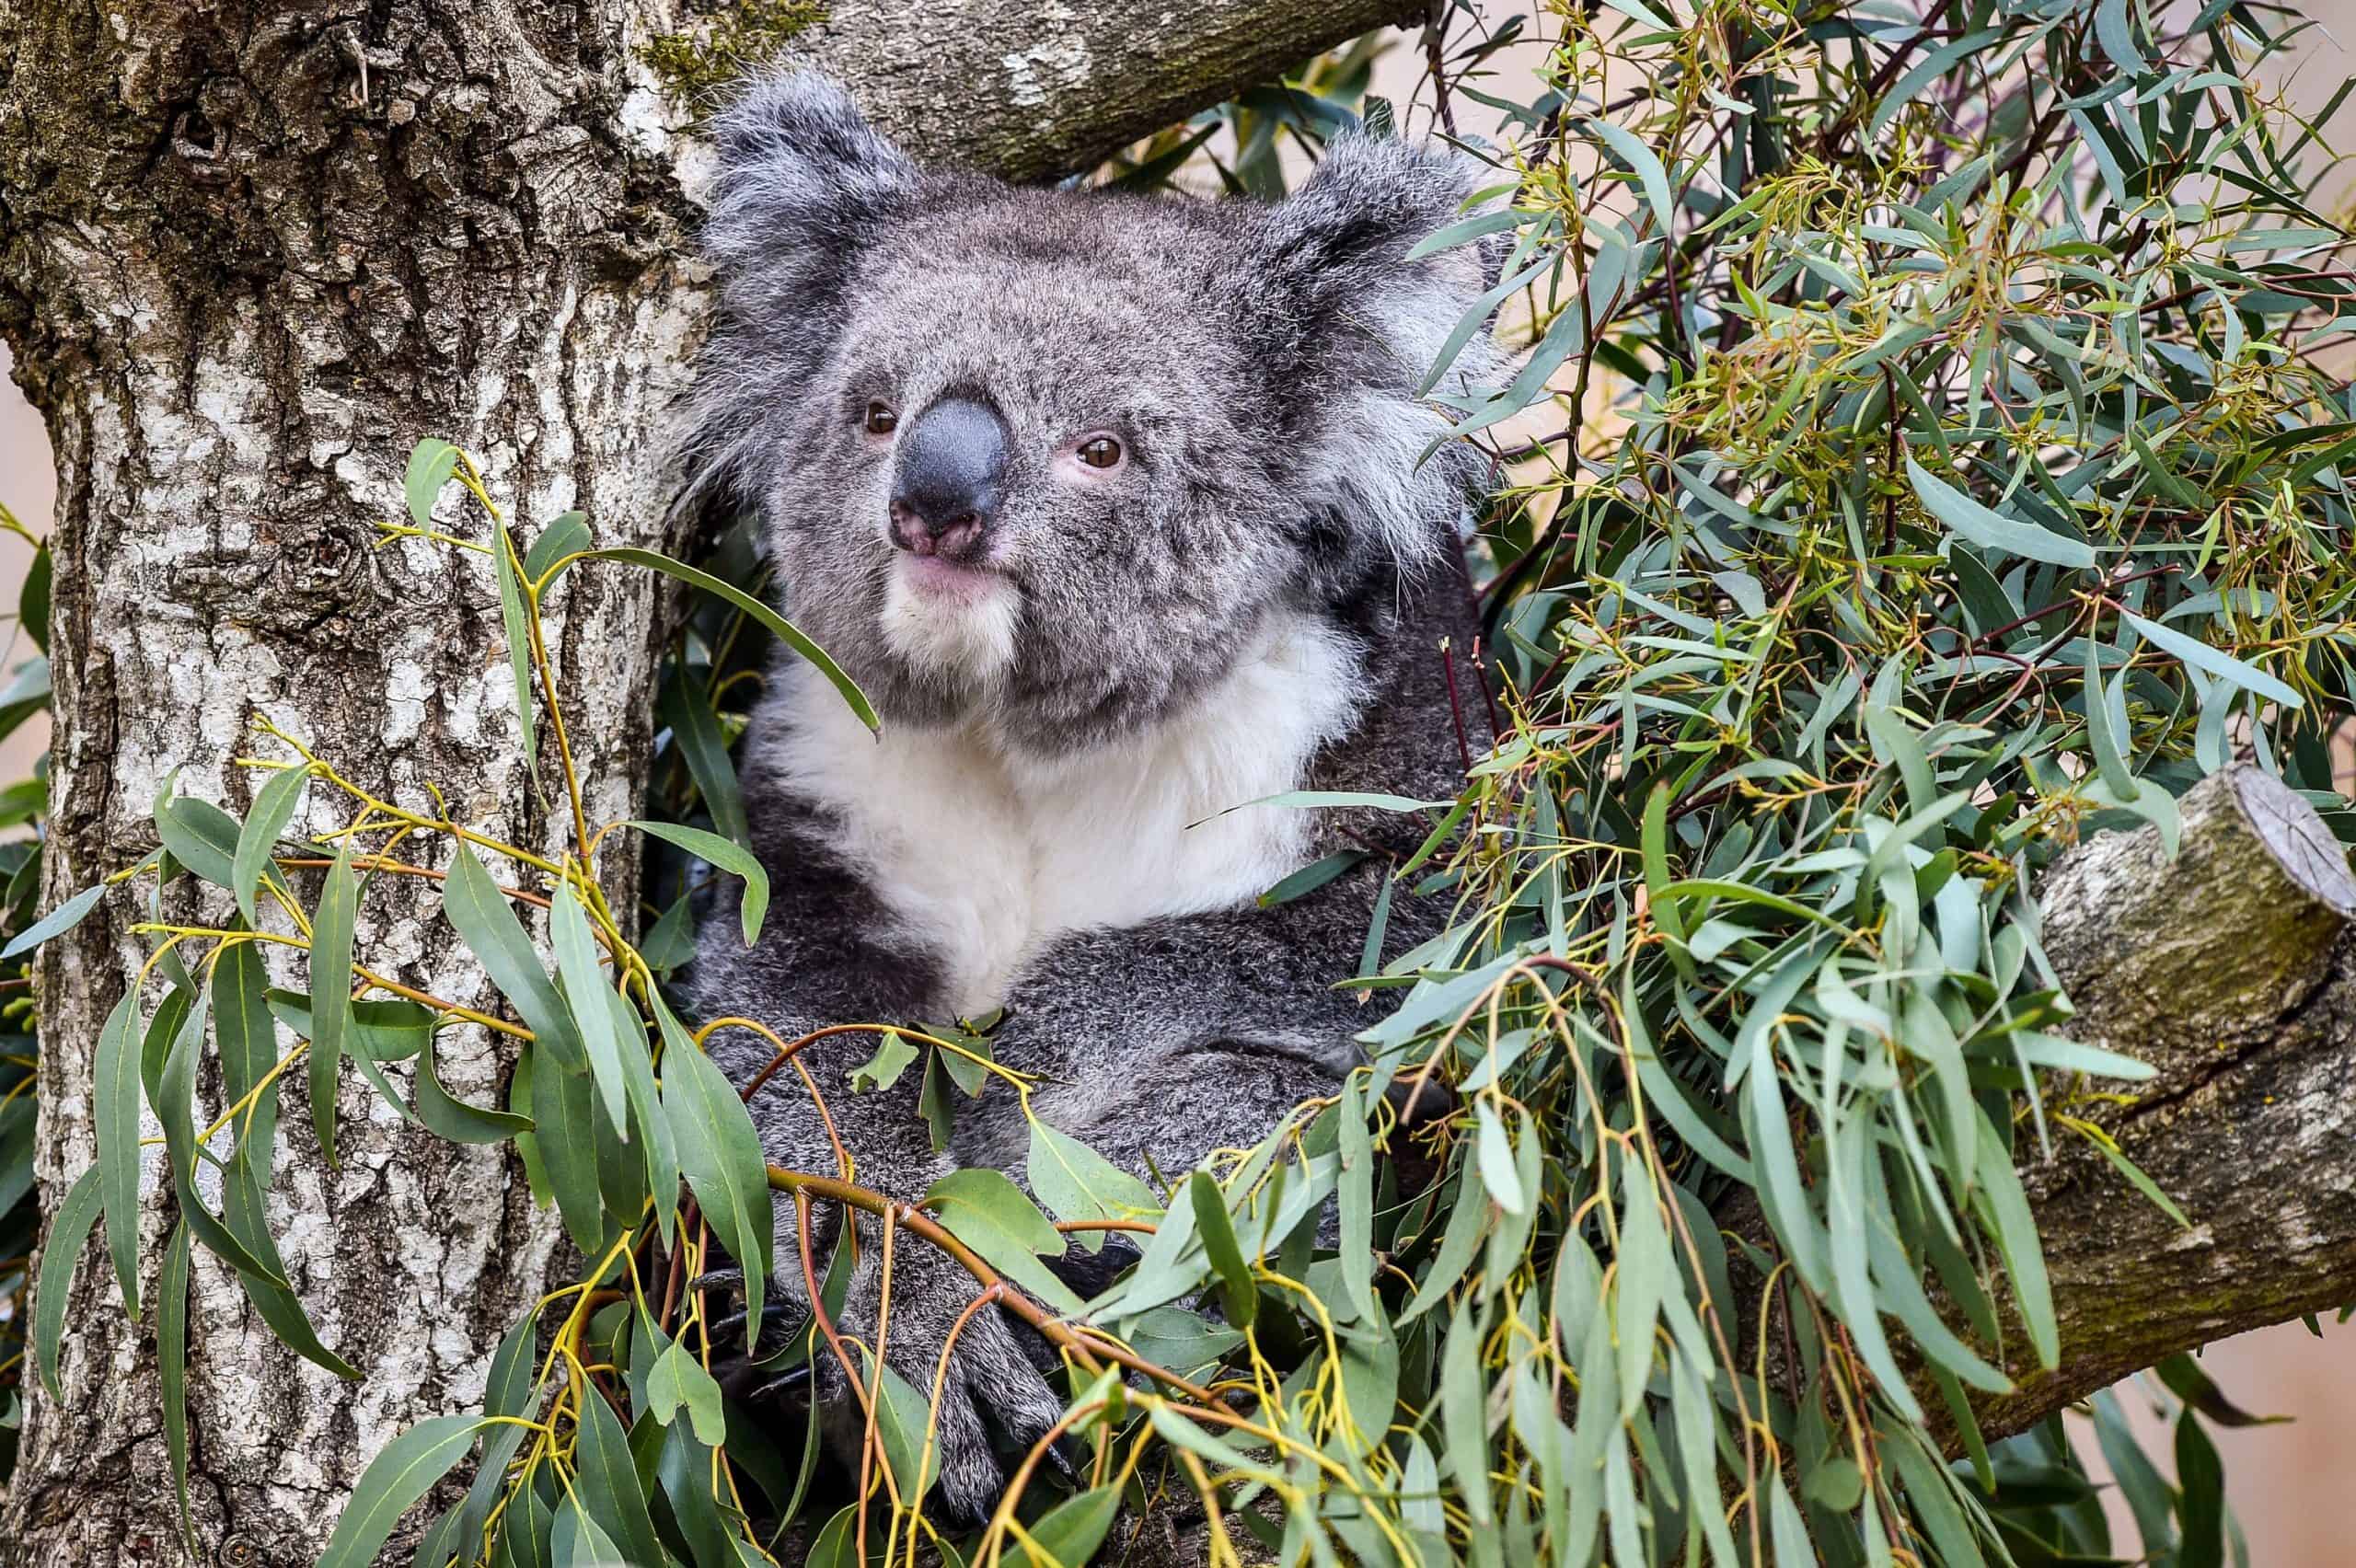 Australia bushfires caused thousands of koala deaths in New South Wales